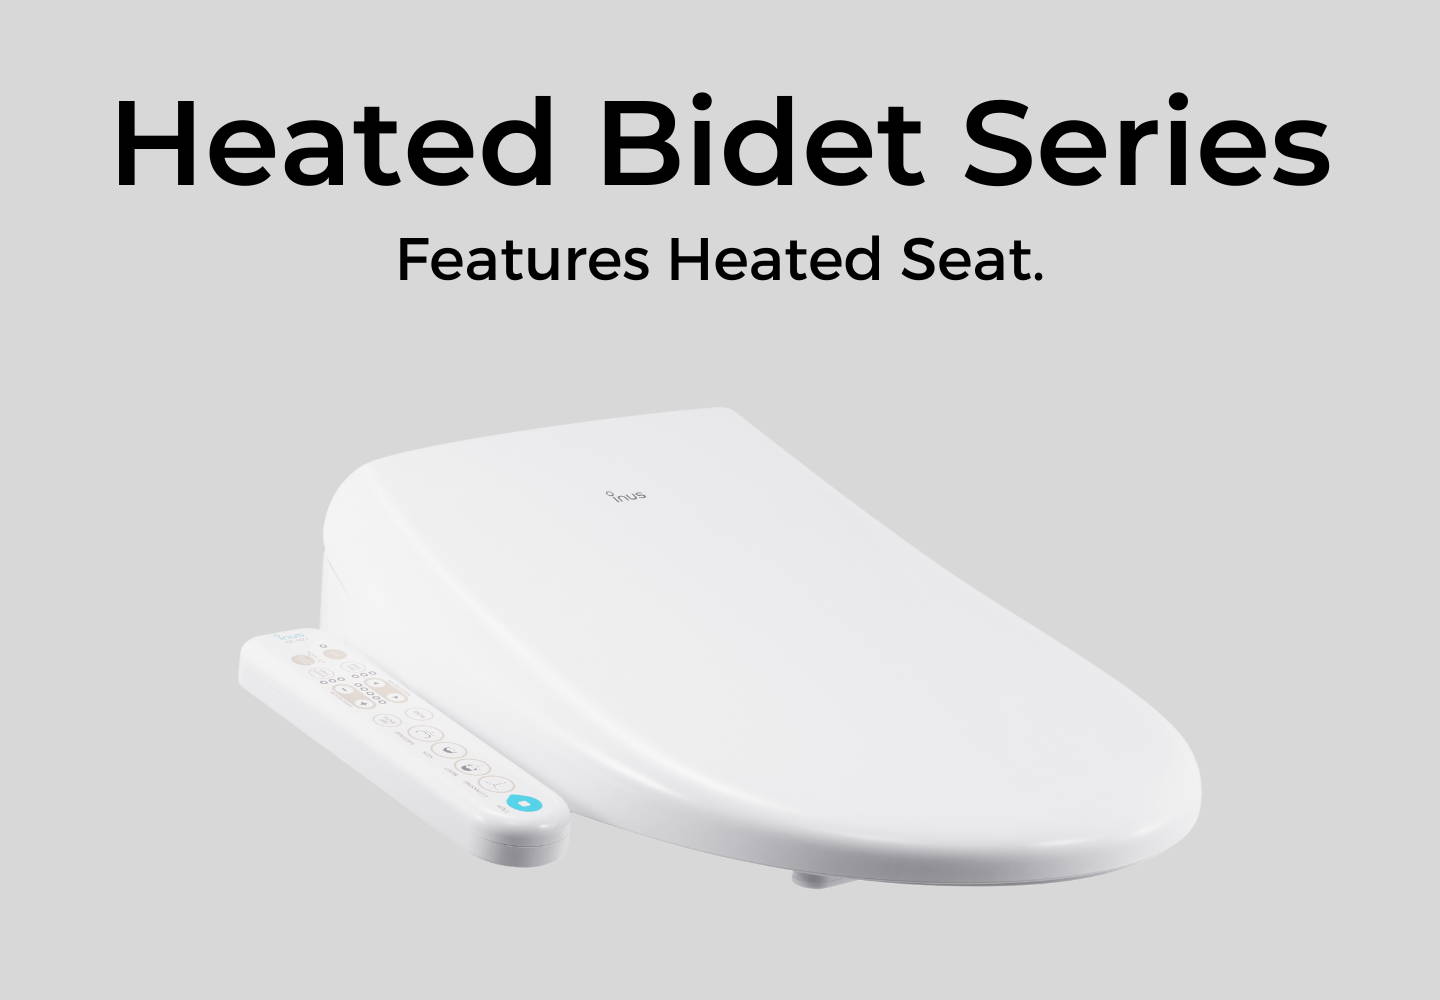 bidet with heated seat, bidet, self-cleansing nozzle, warm seat